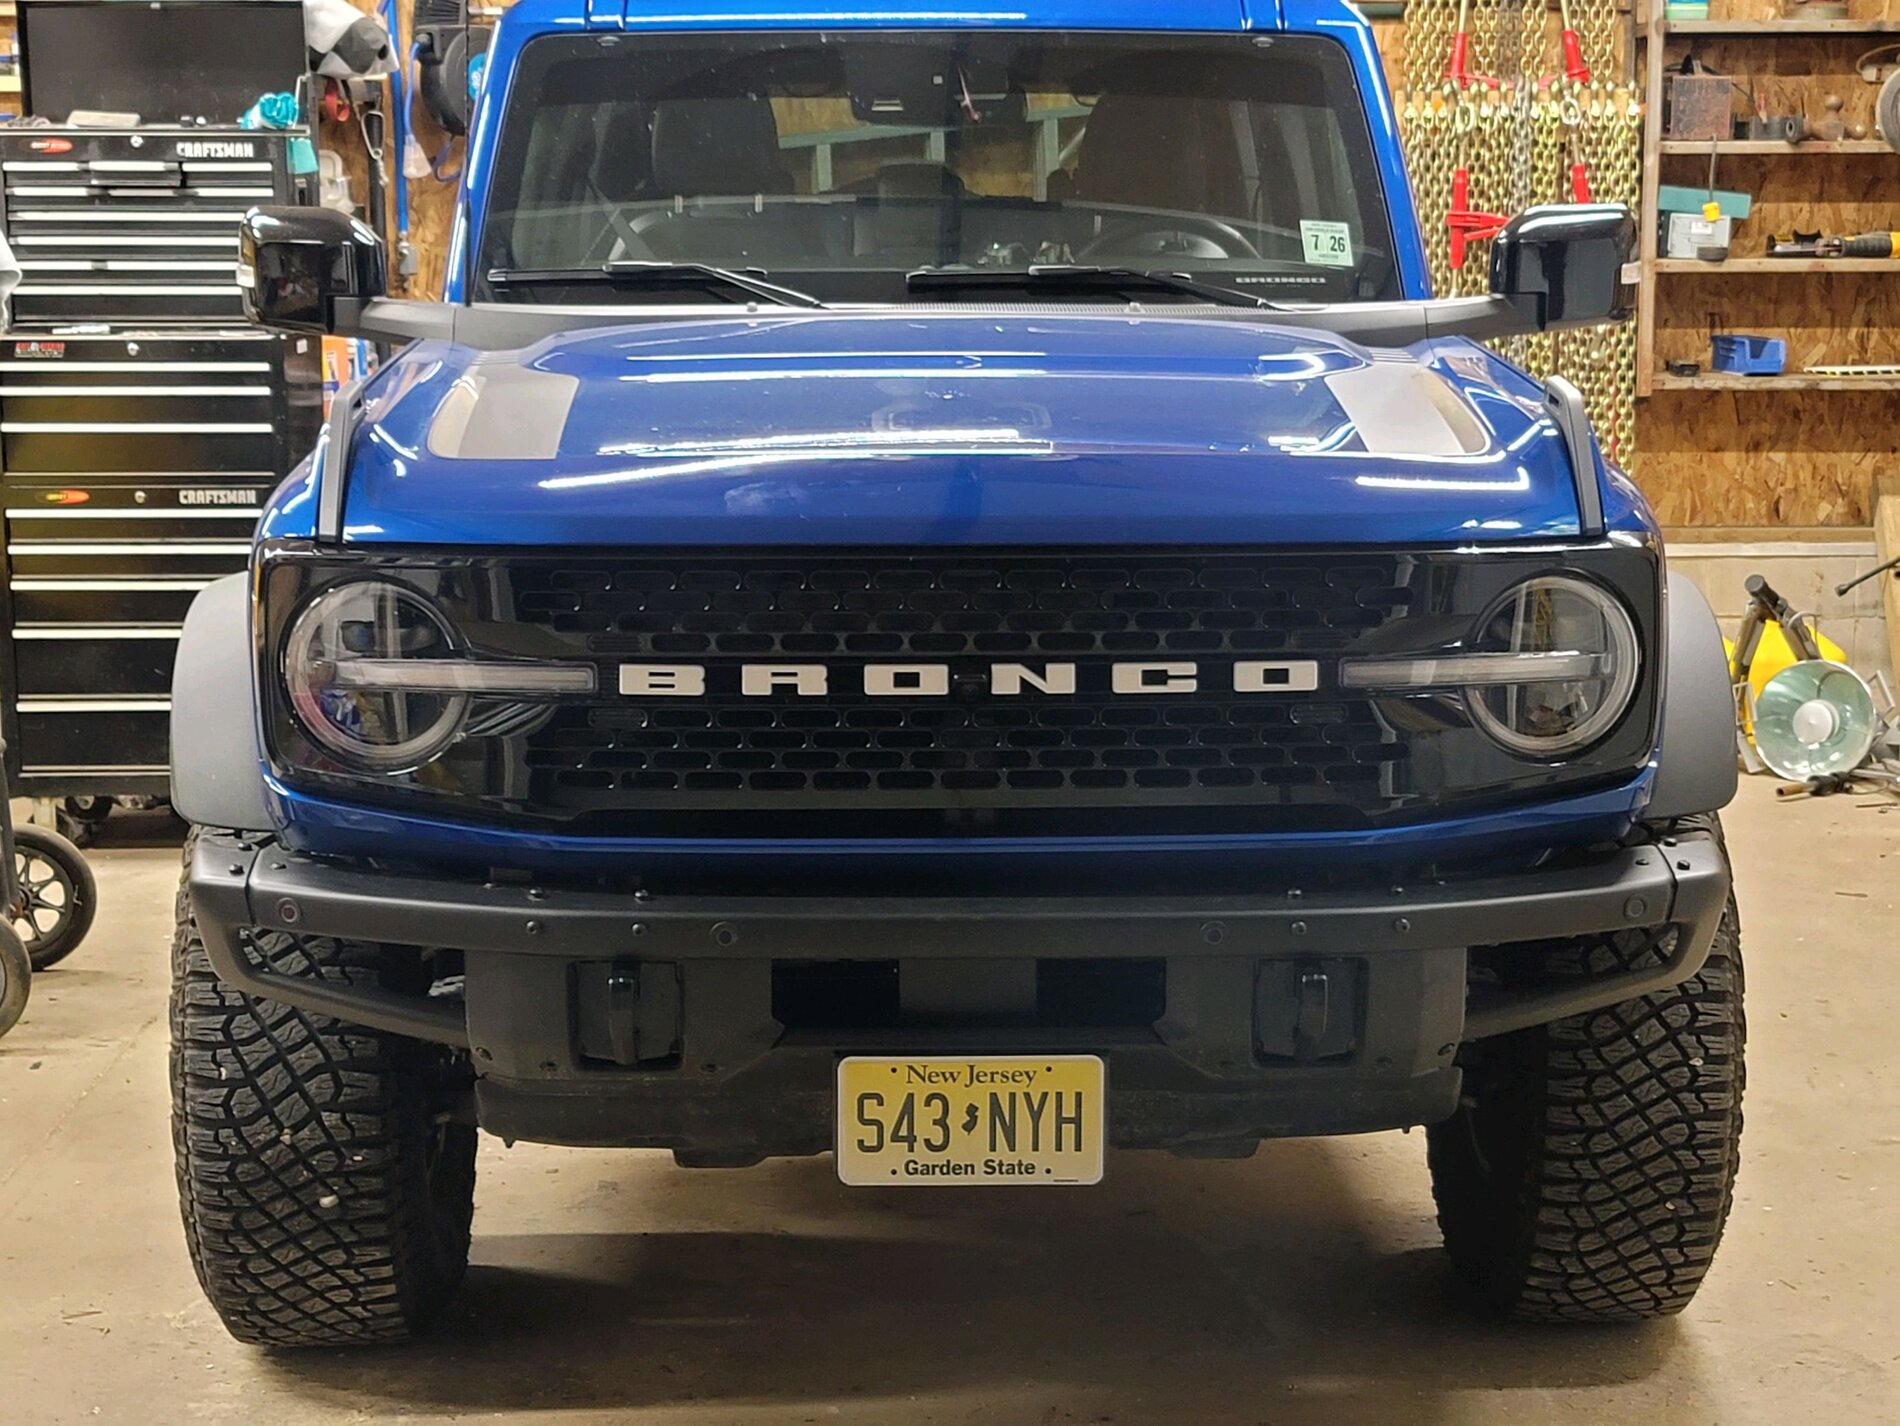 Ford Bronco PRICE DROP - Finally a Front License Plate bracket solution - order yours today 072D7685-43C7-4AFF-8087-CD4FA56E5D0D